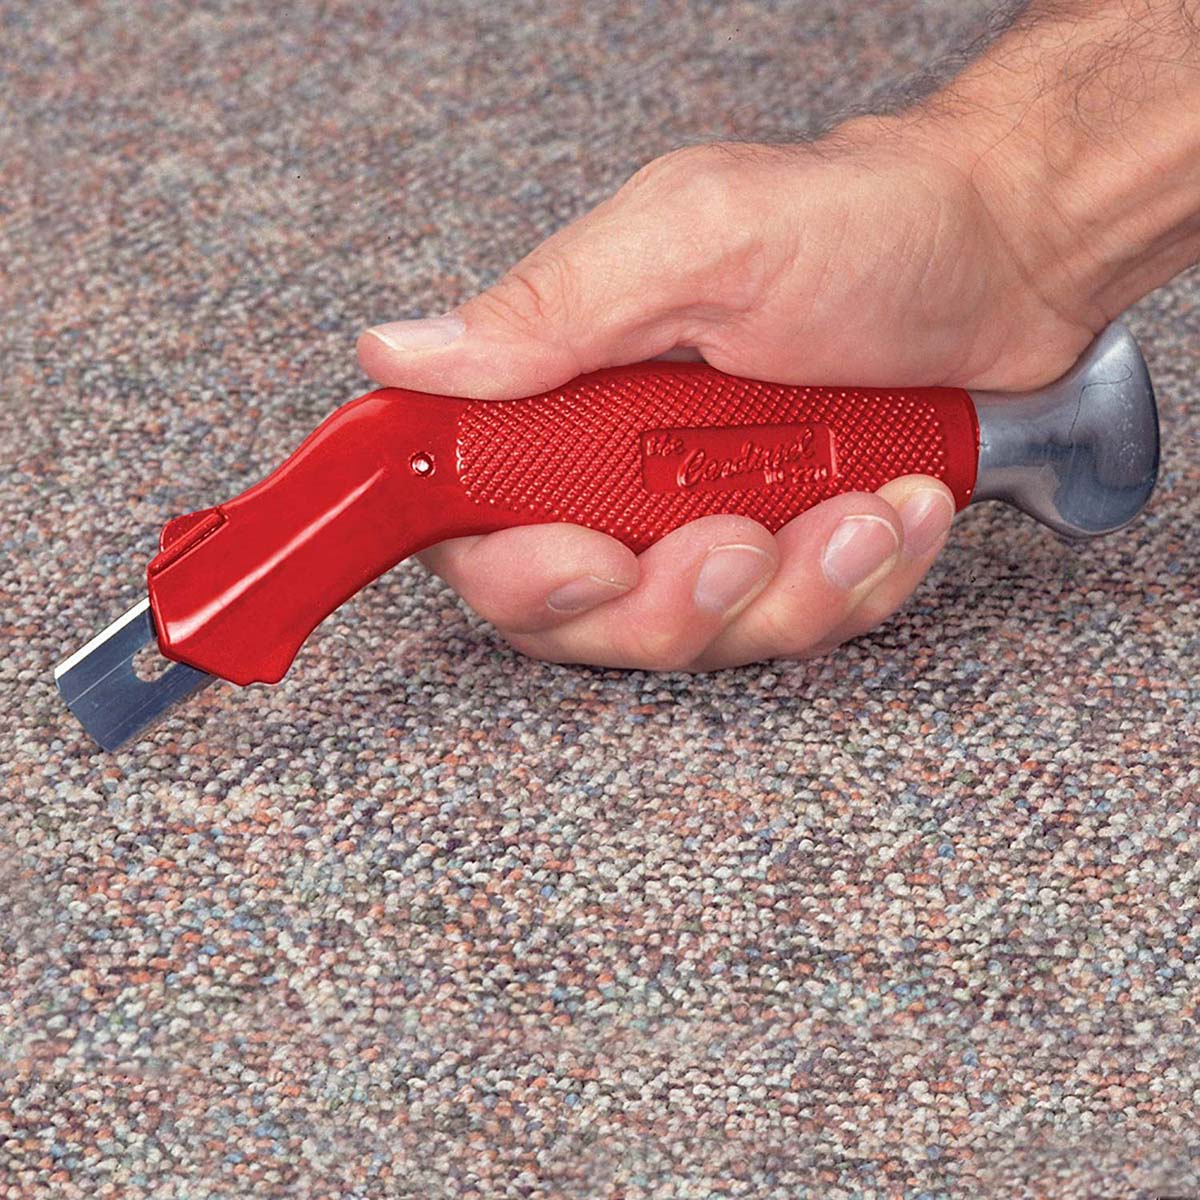 How Is A Carpet Knife Different From A Utility Knife